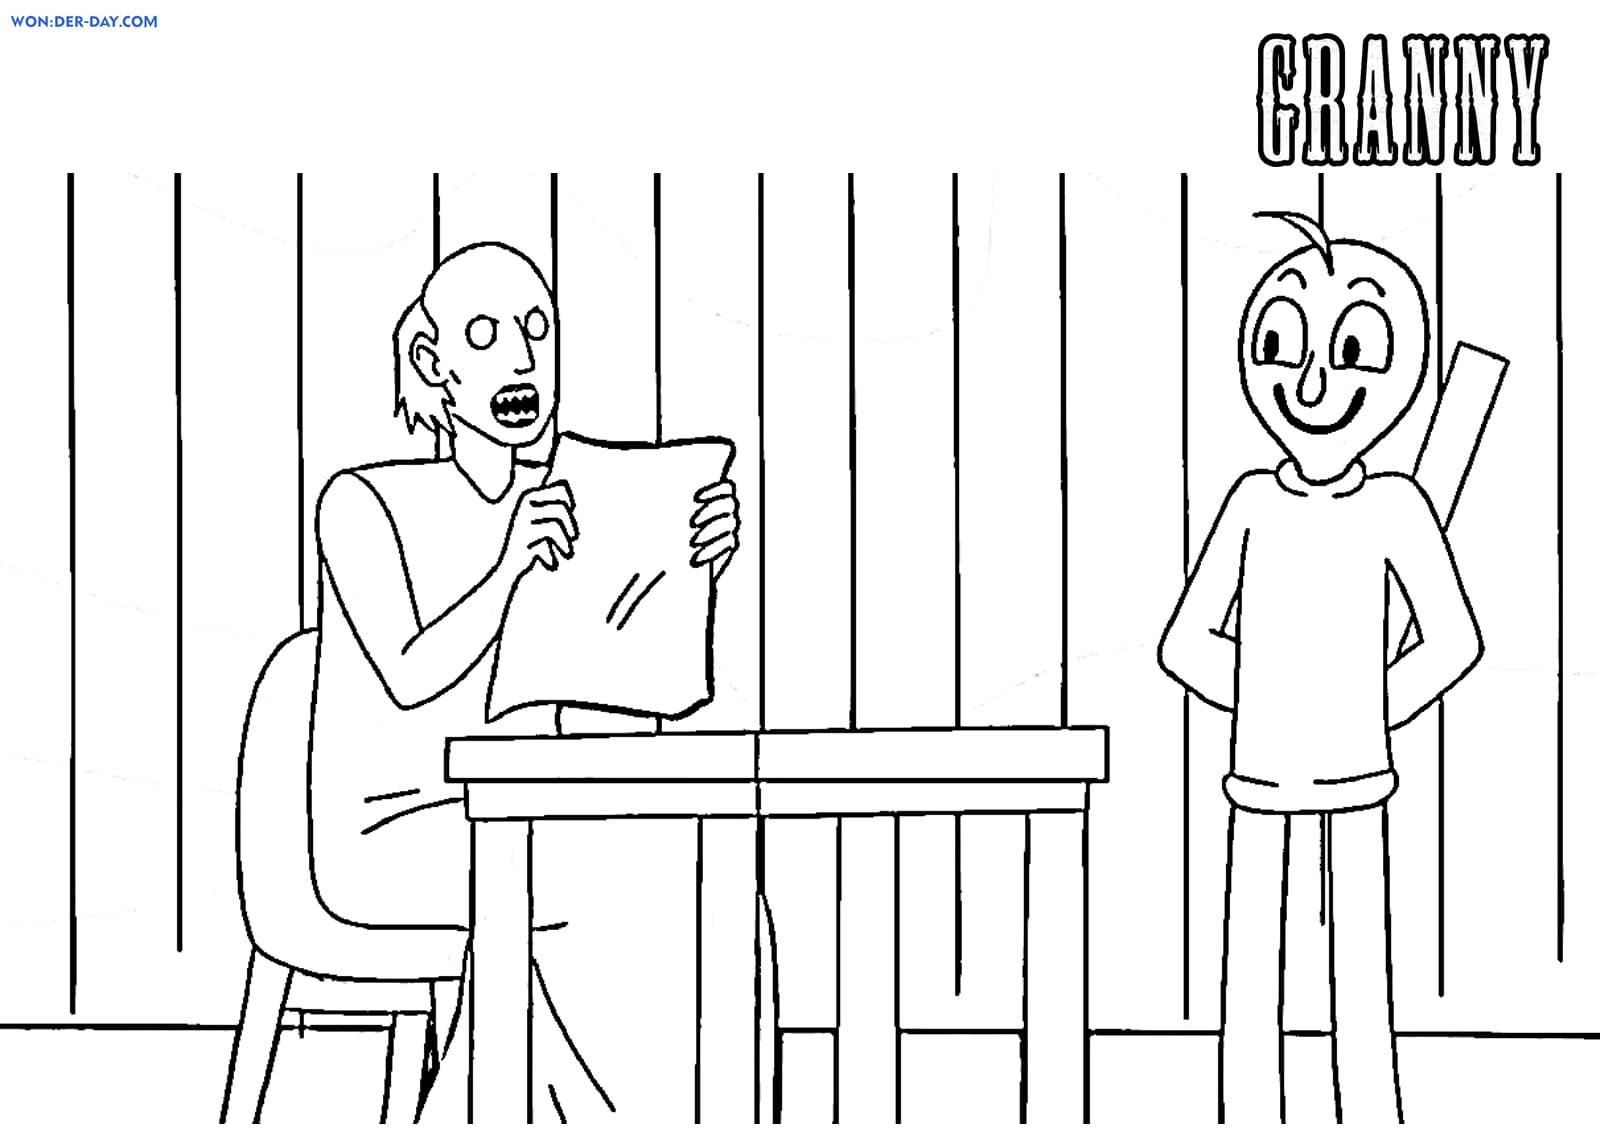 Granny Horror Game Coloring Pages | WONDER DAY — Coloring pages for